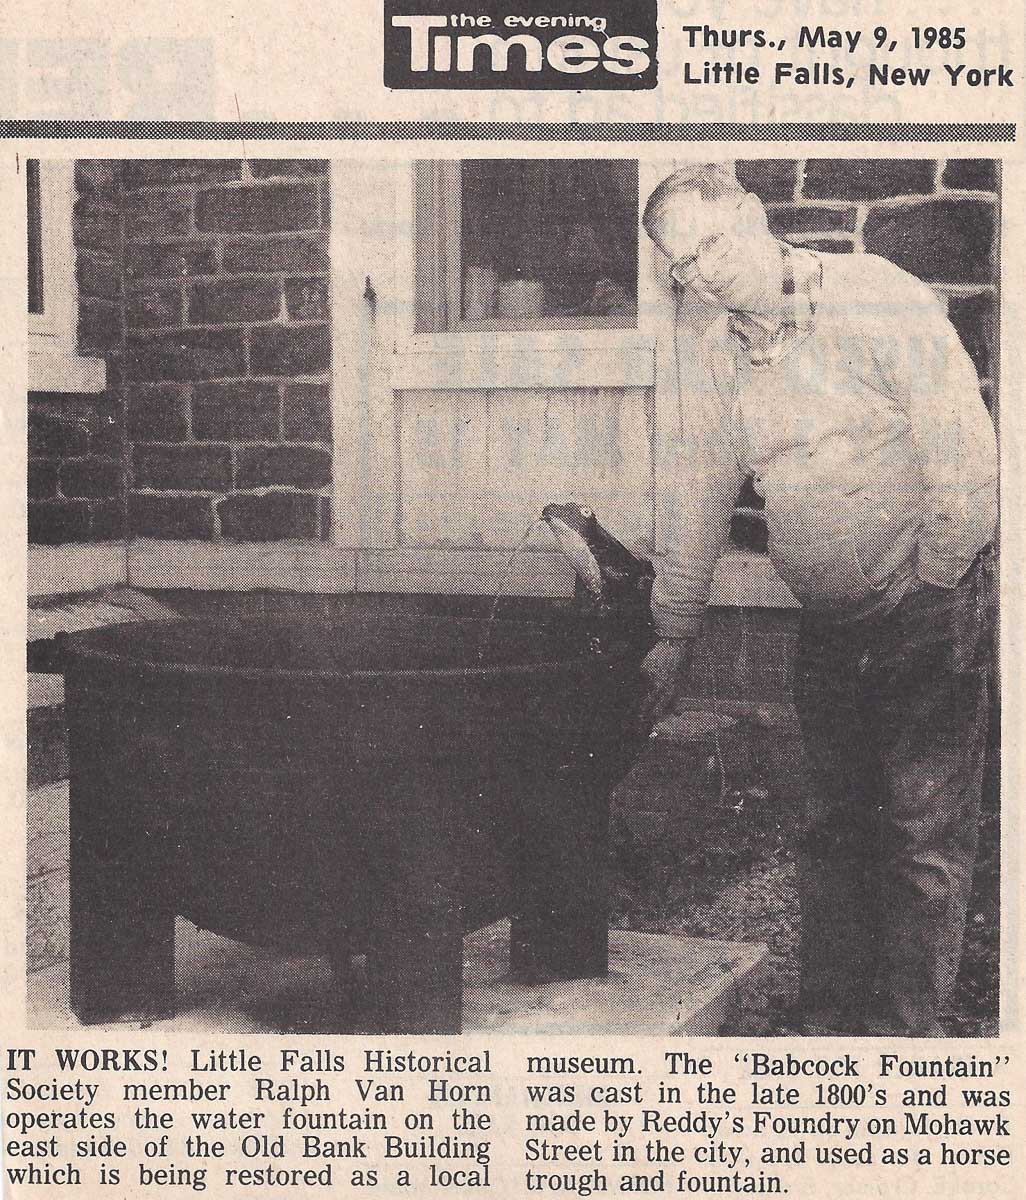 The Evening Times, May 9, 1985, Little Falls, New York, with Little Falls Historical Society member Ralph Van Horn.